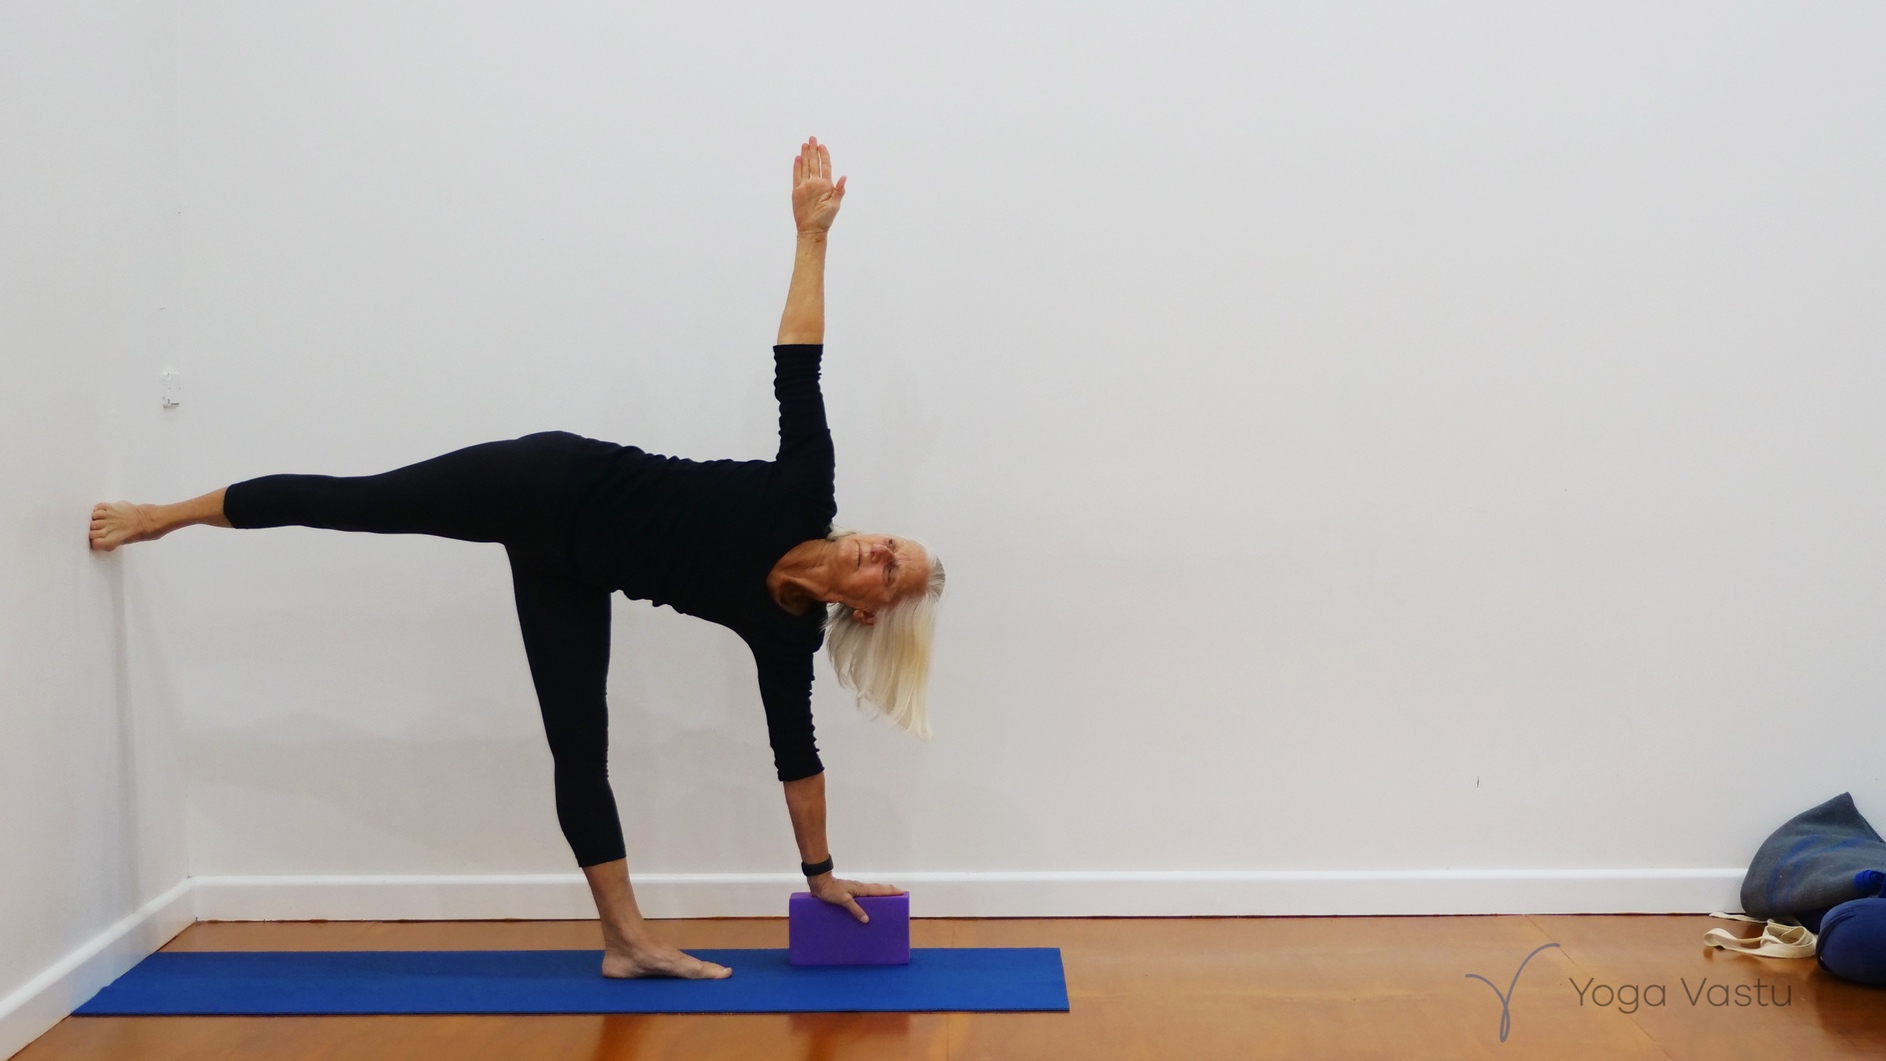 How to do Frog Pose in Yoga - Proper Form, Variations, and Common Mistakes  - The Yoga Nomads